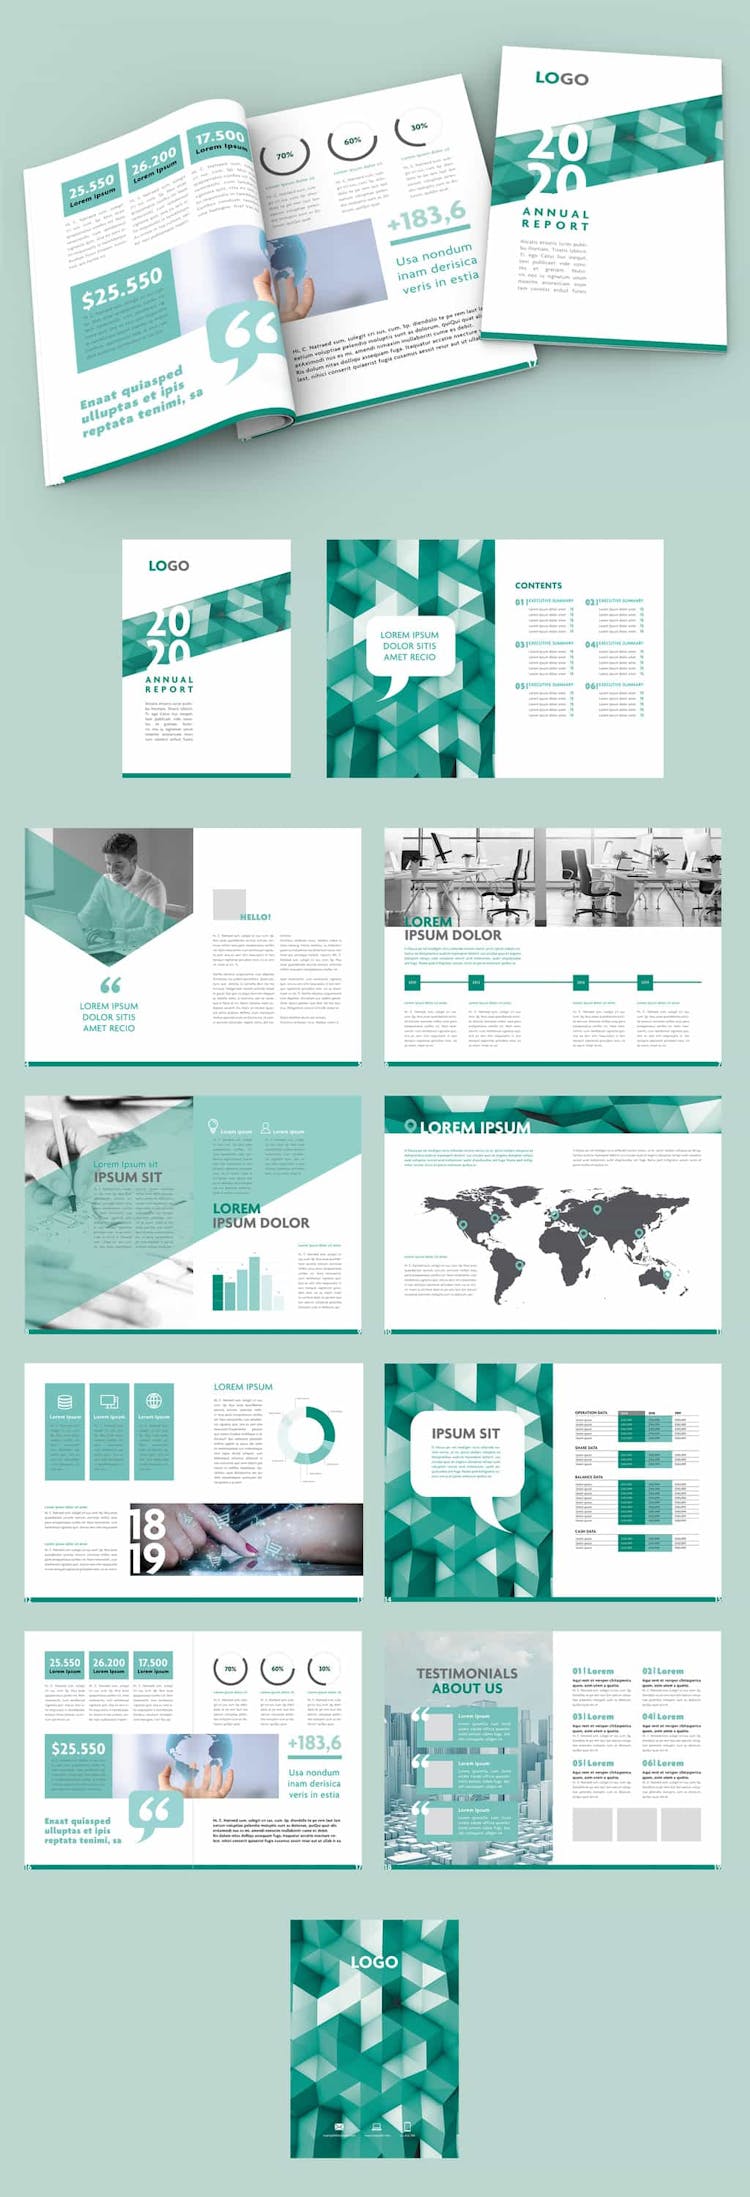 Annual Report Layout Template from redokun.imgix.net